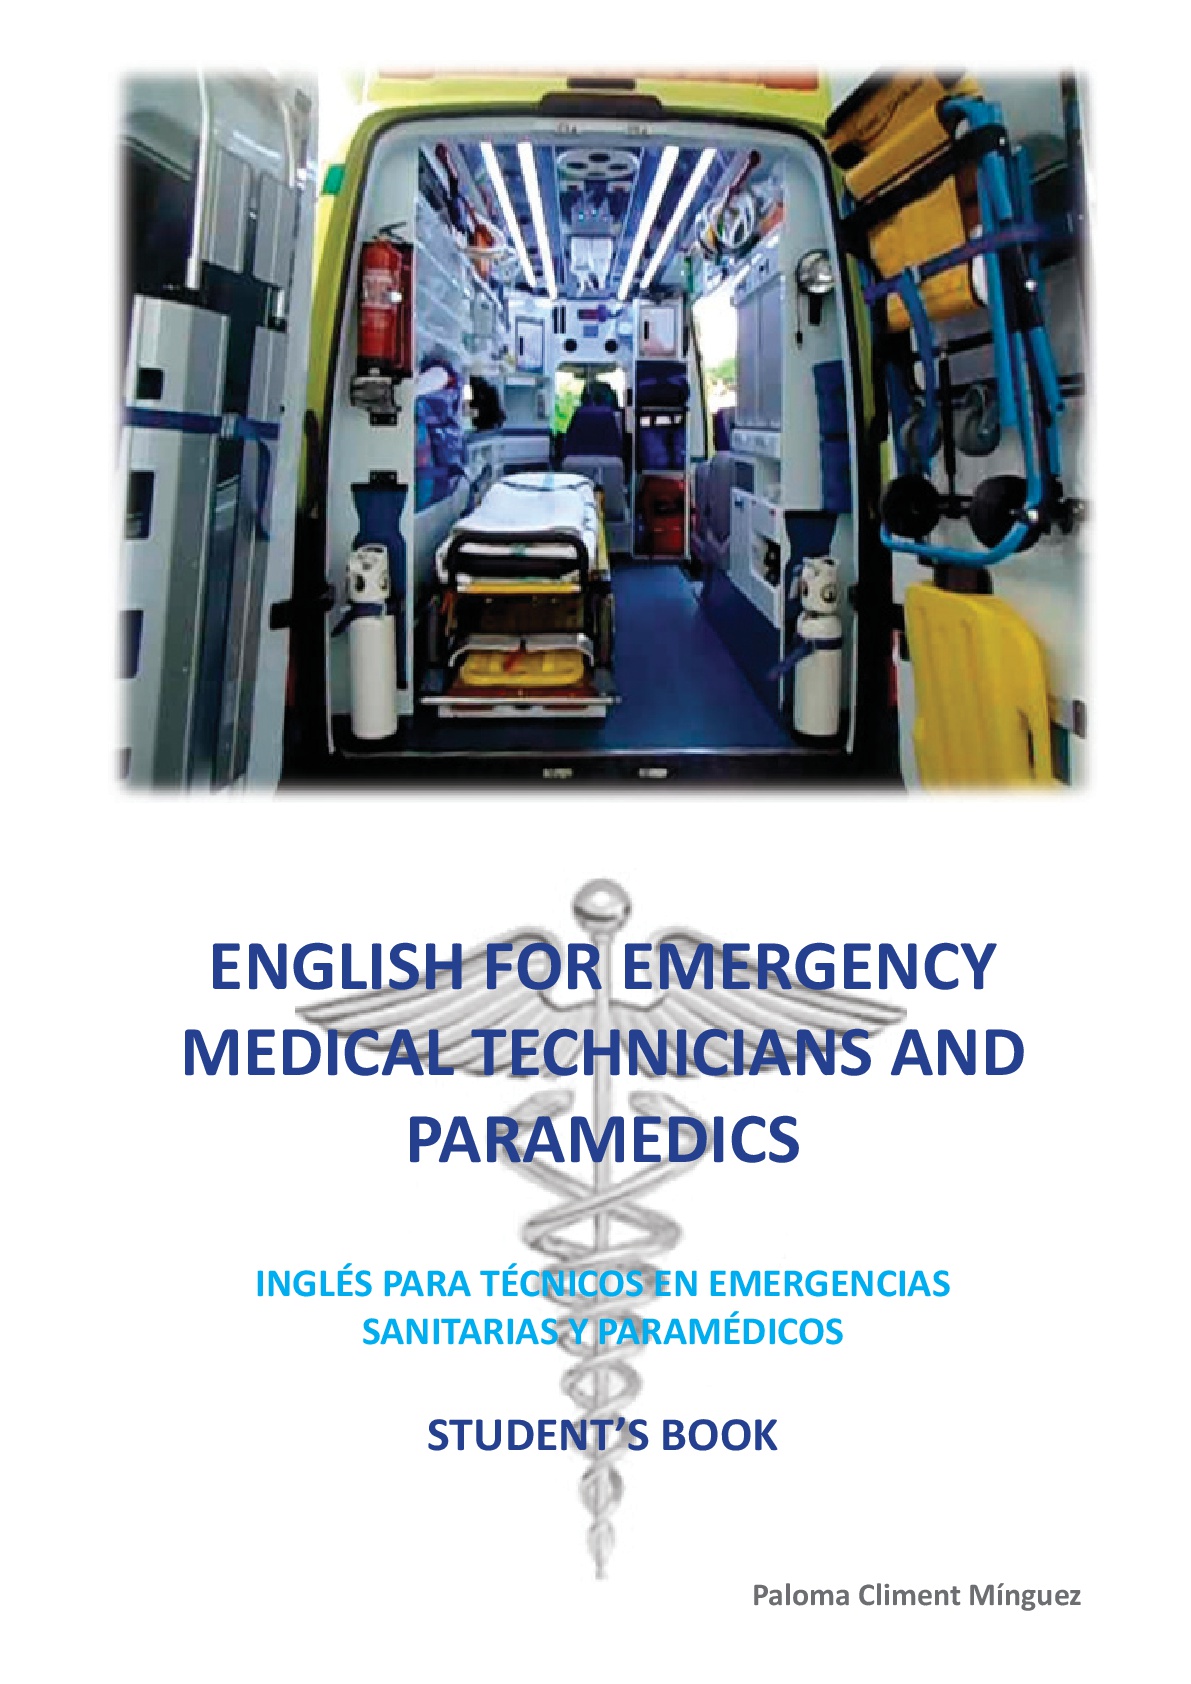 English for Emergency medical technicians and paramedics